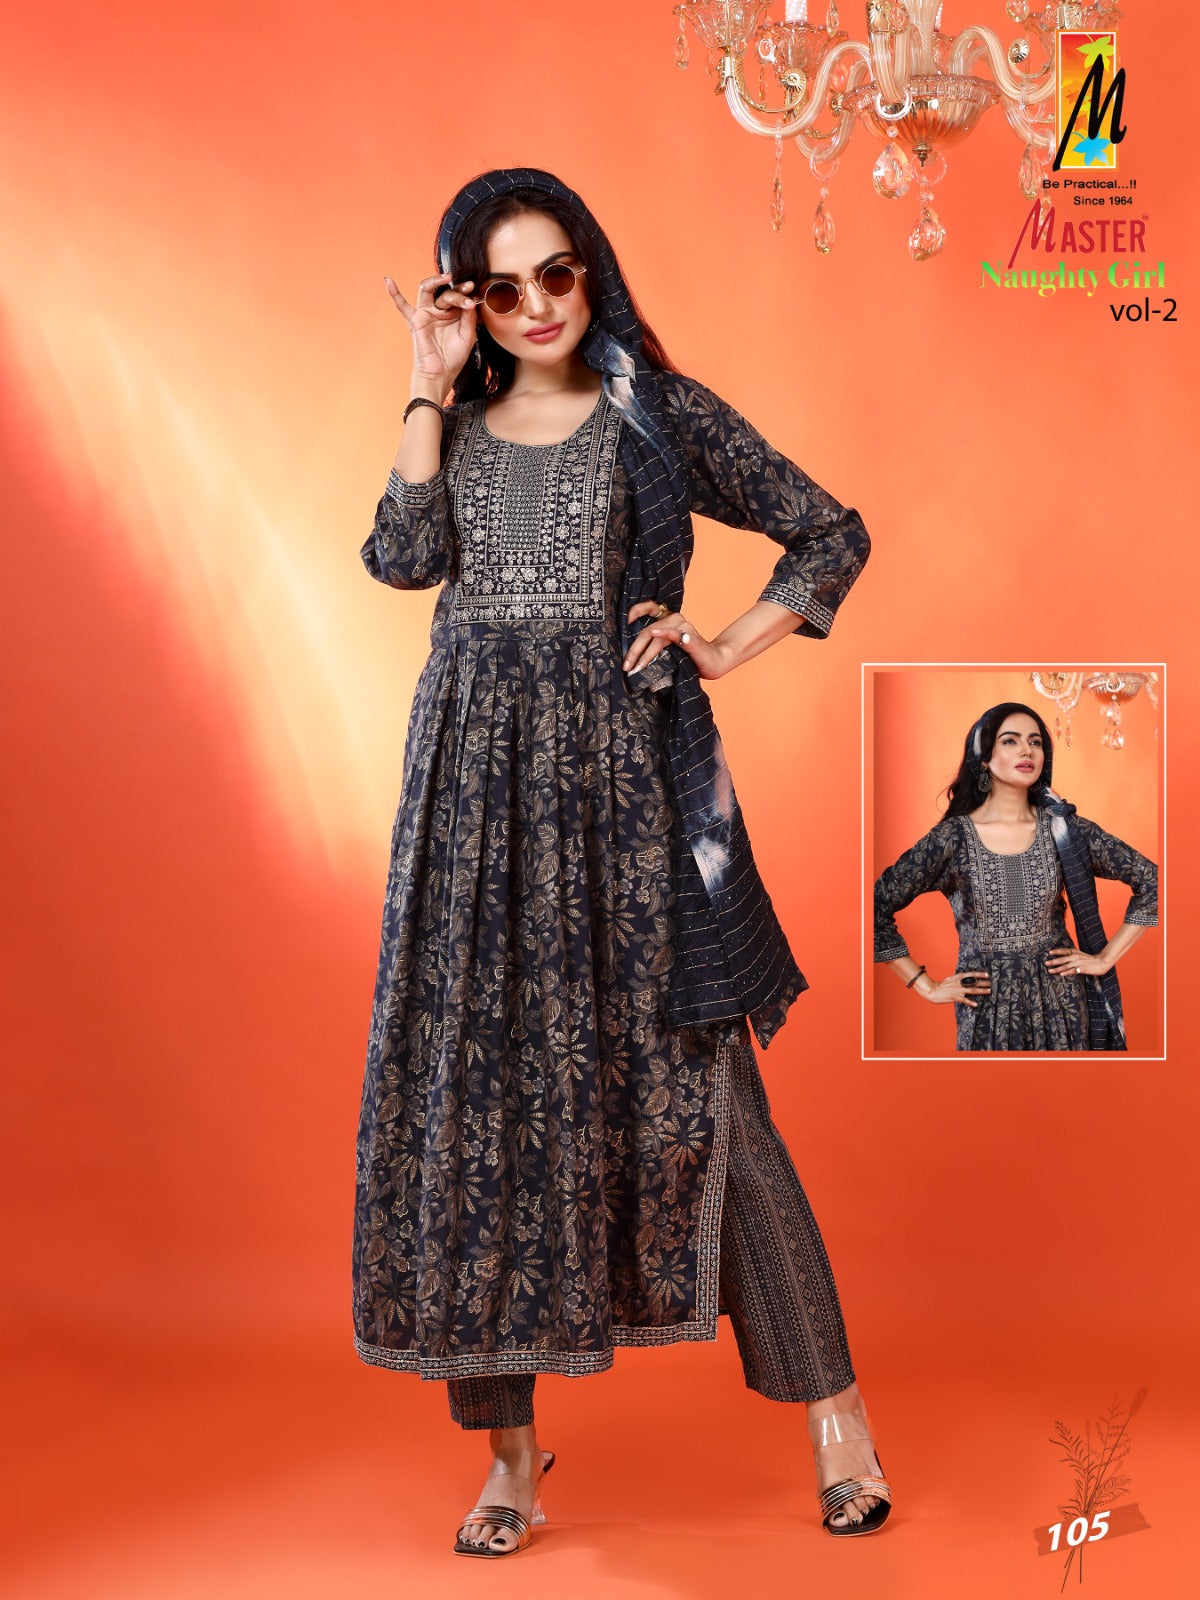 Naughty Girl Vol 2 Master Capsule Readymade Pant Style Suits